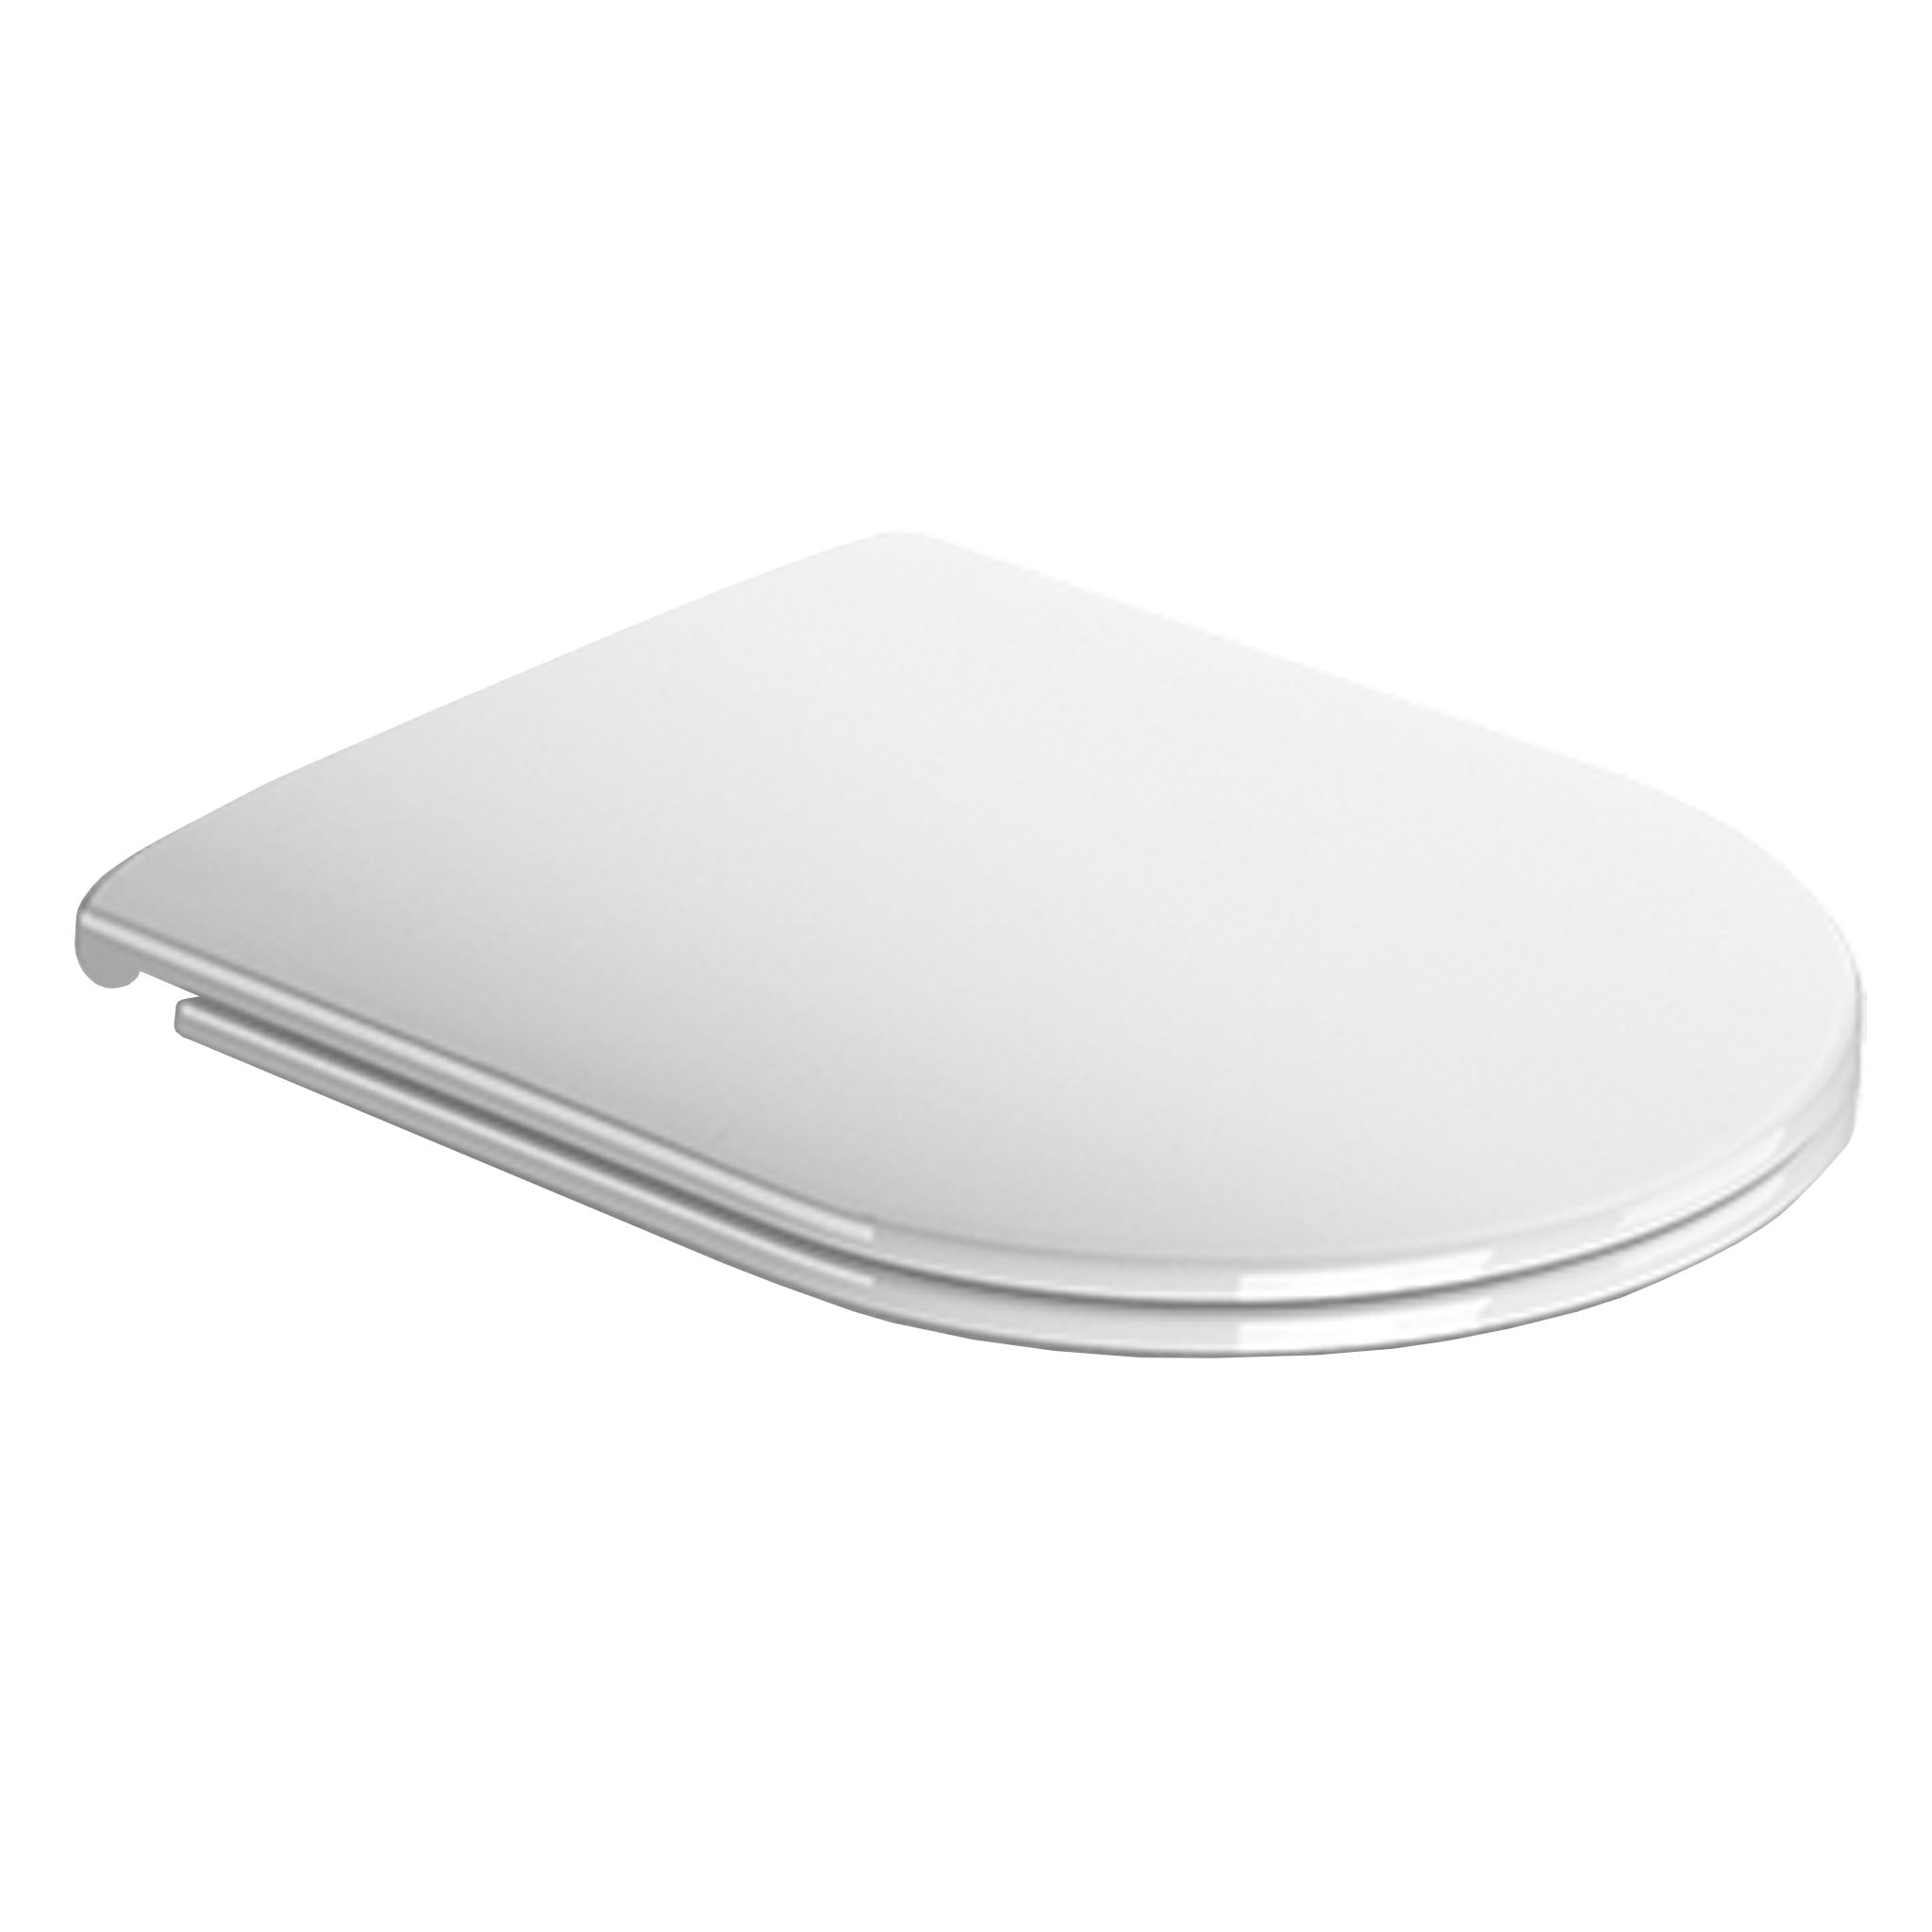 GSI Contract Soft Close Toilet Seat & Cover